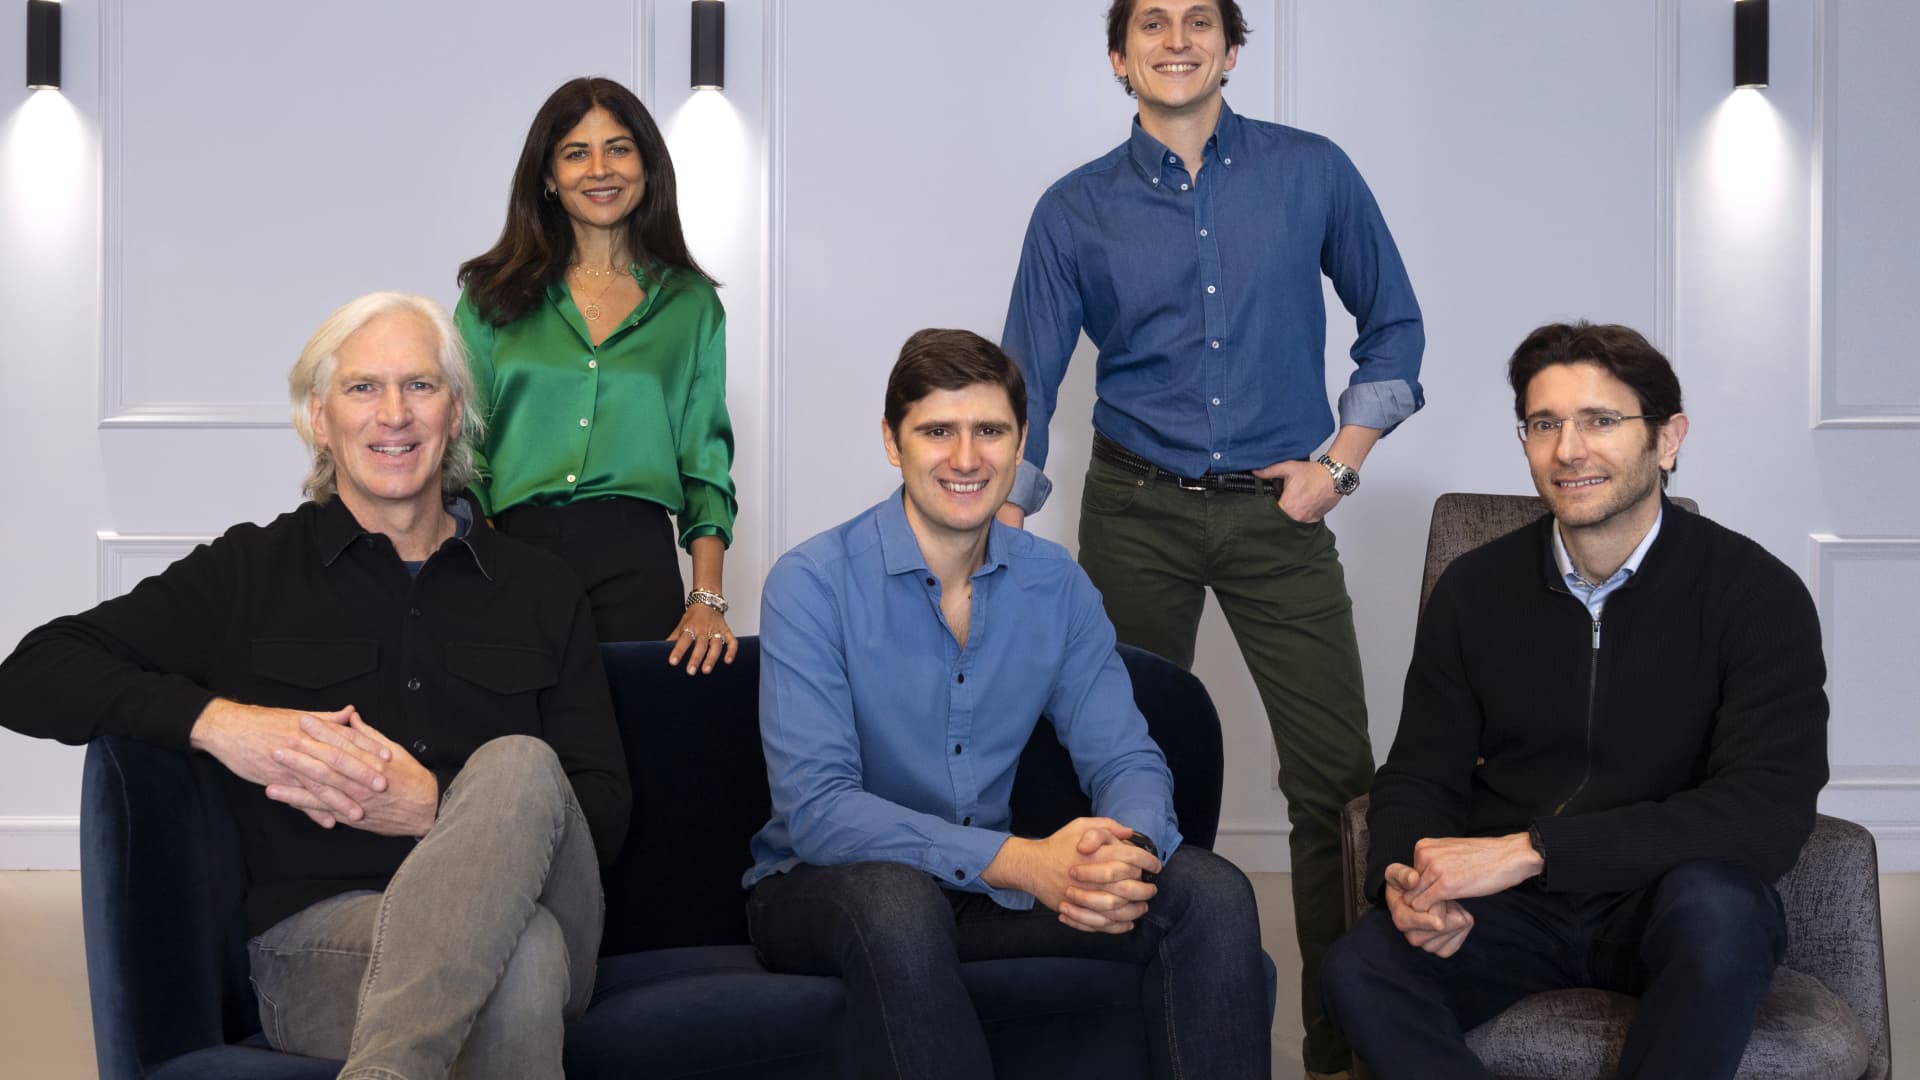 Early Facebook investor Accel raises 0 million fund to back European and Israeli startups